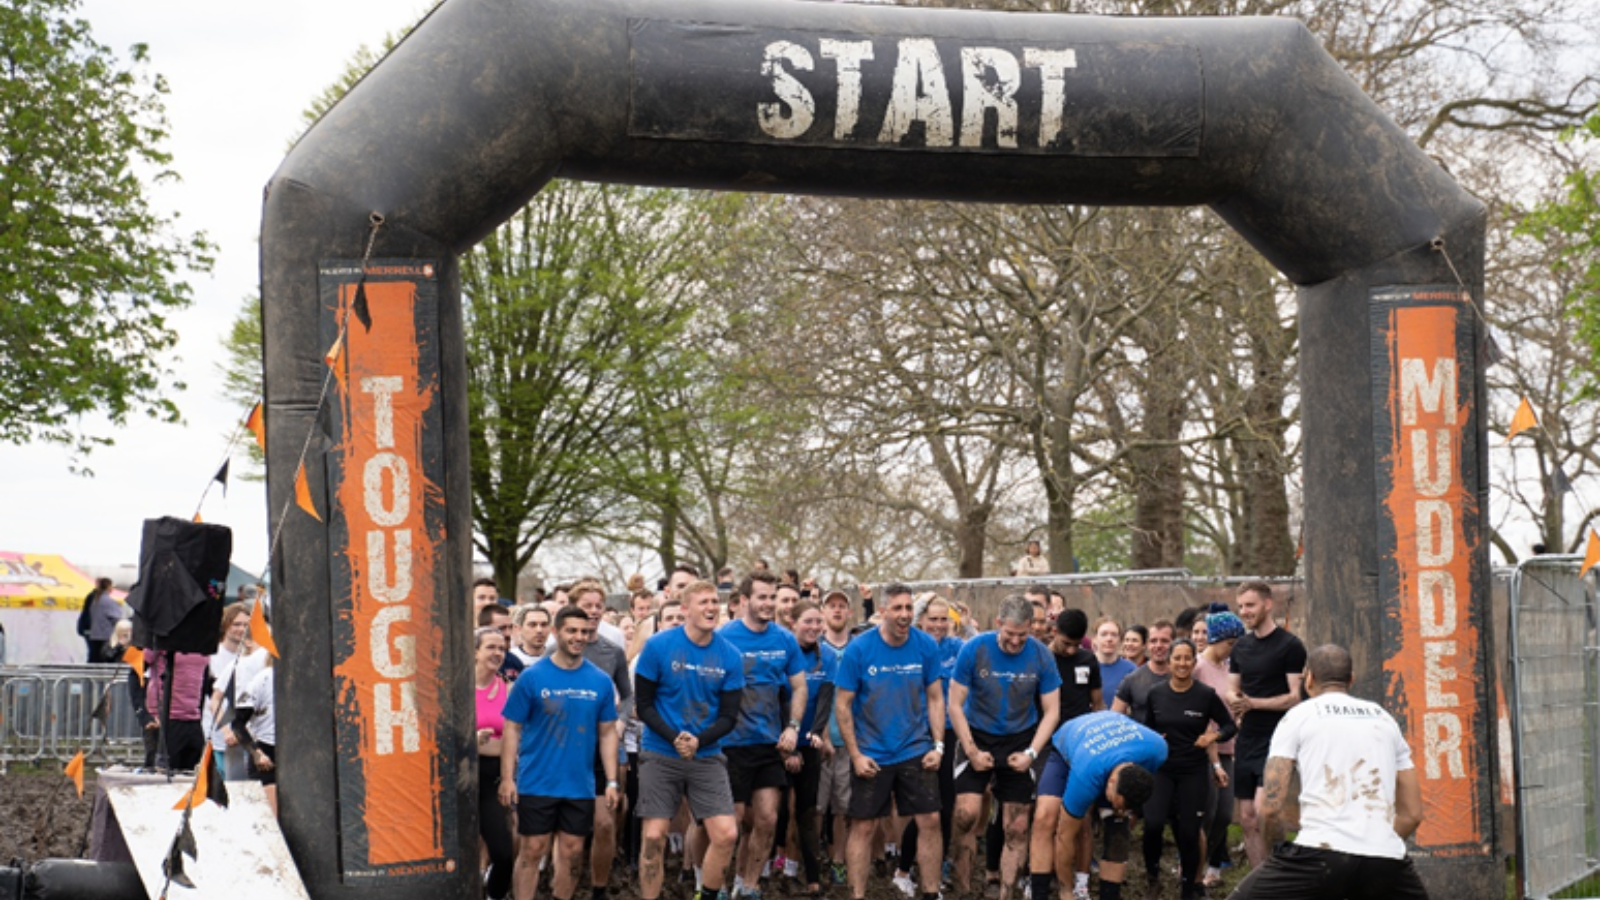 The start line for the Tough Mudder race.